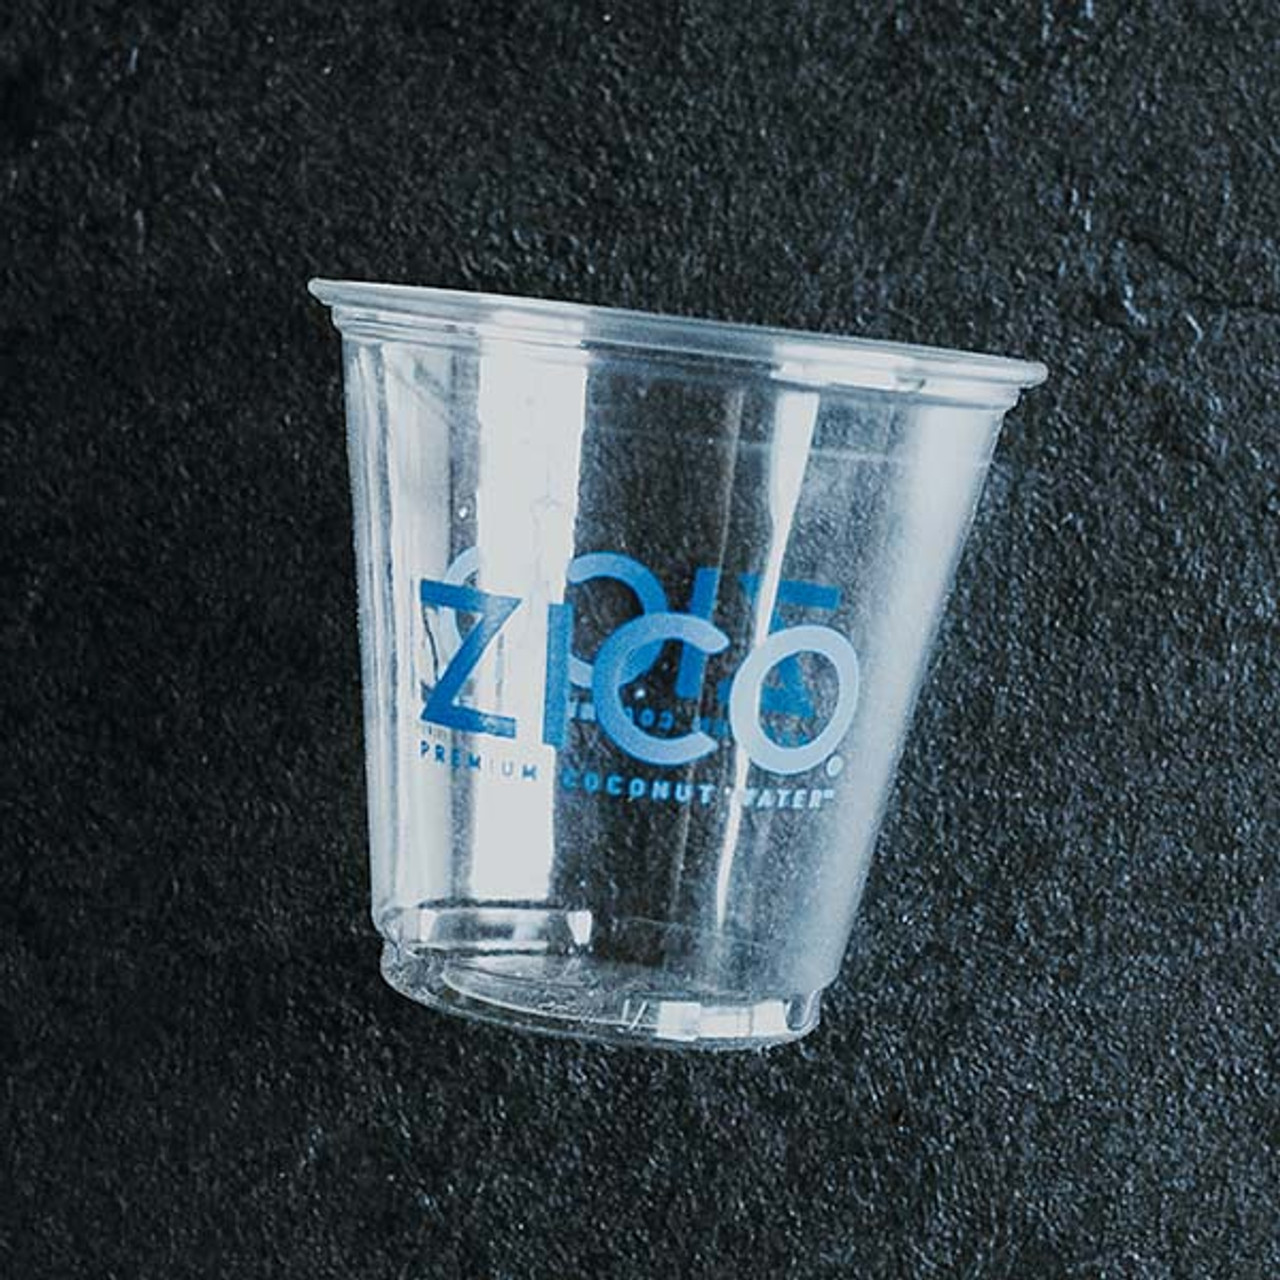 Custom Clear Plastic Cups – Easy To Personalize - Cup of Arms